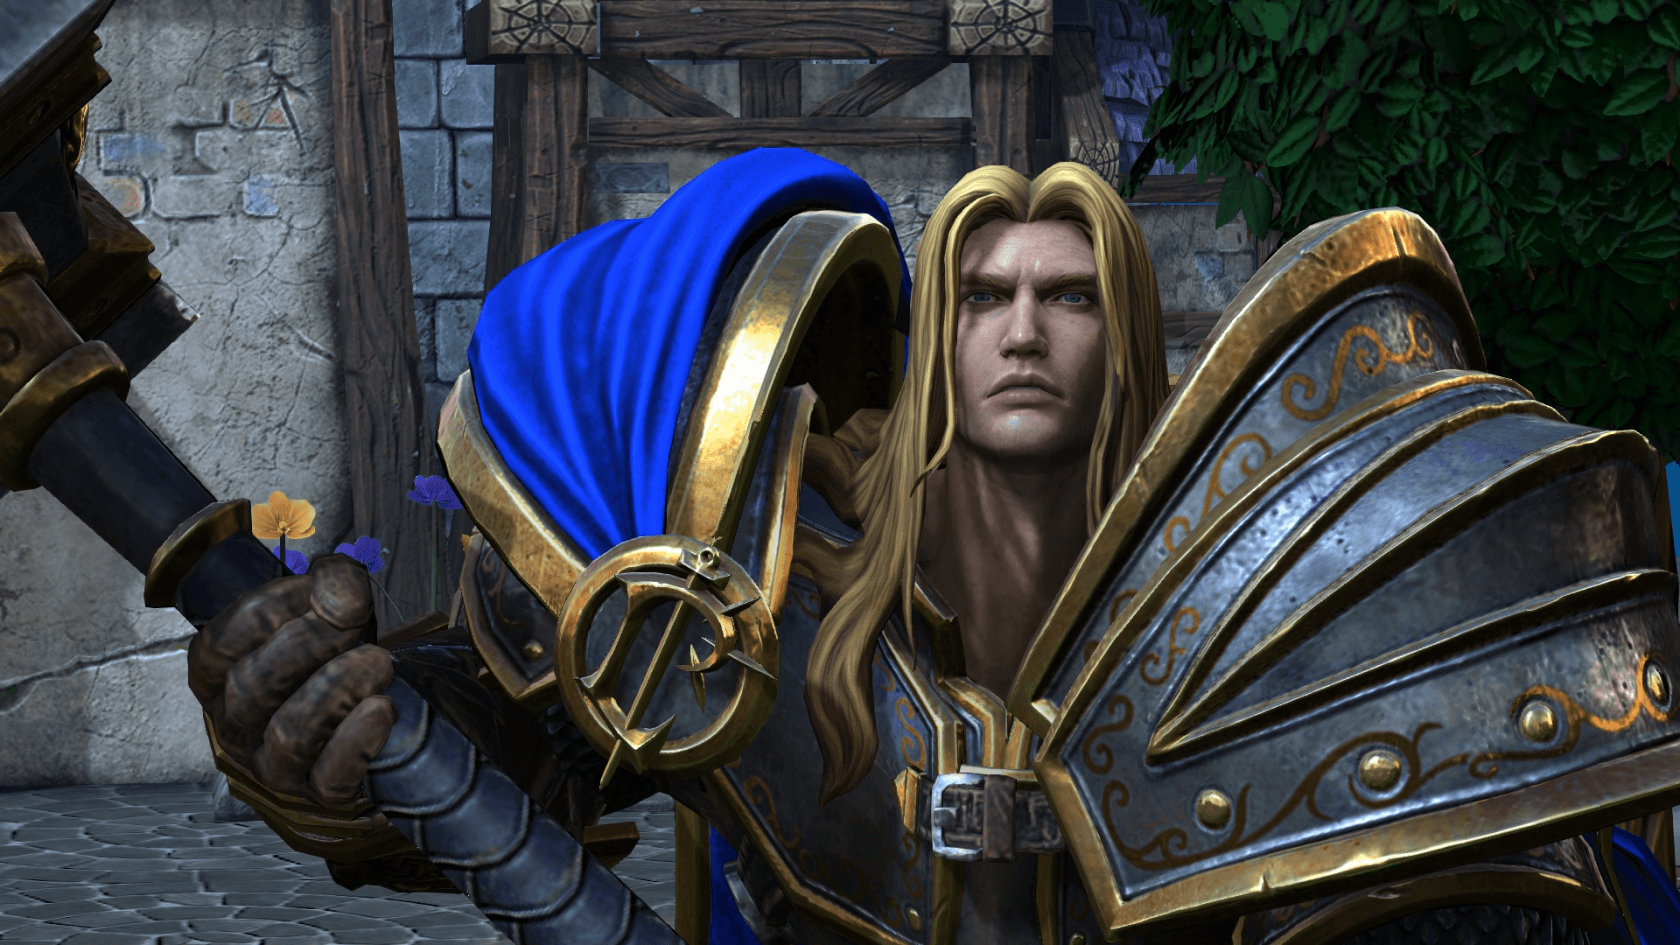 Warcraft 3: Reforged currently has the lowest user score on Metacritic